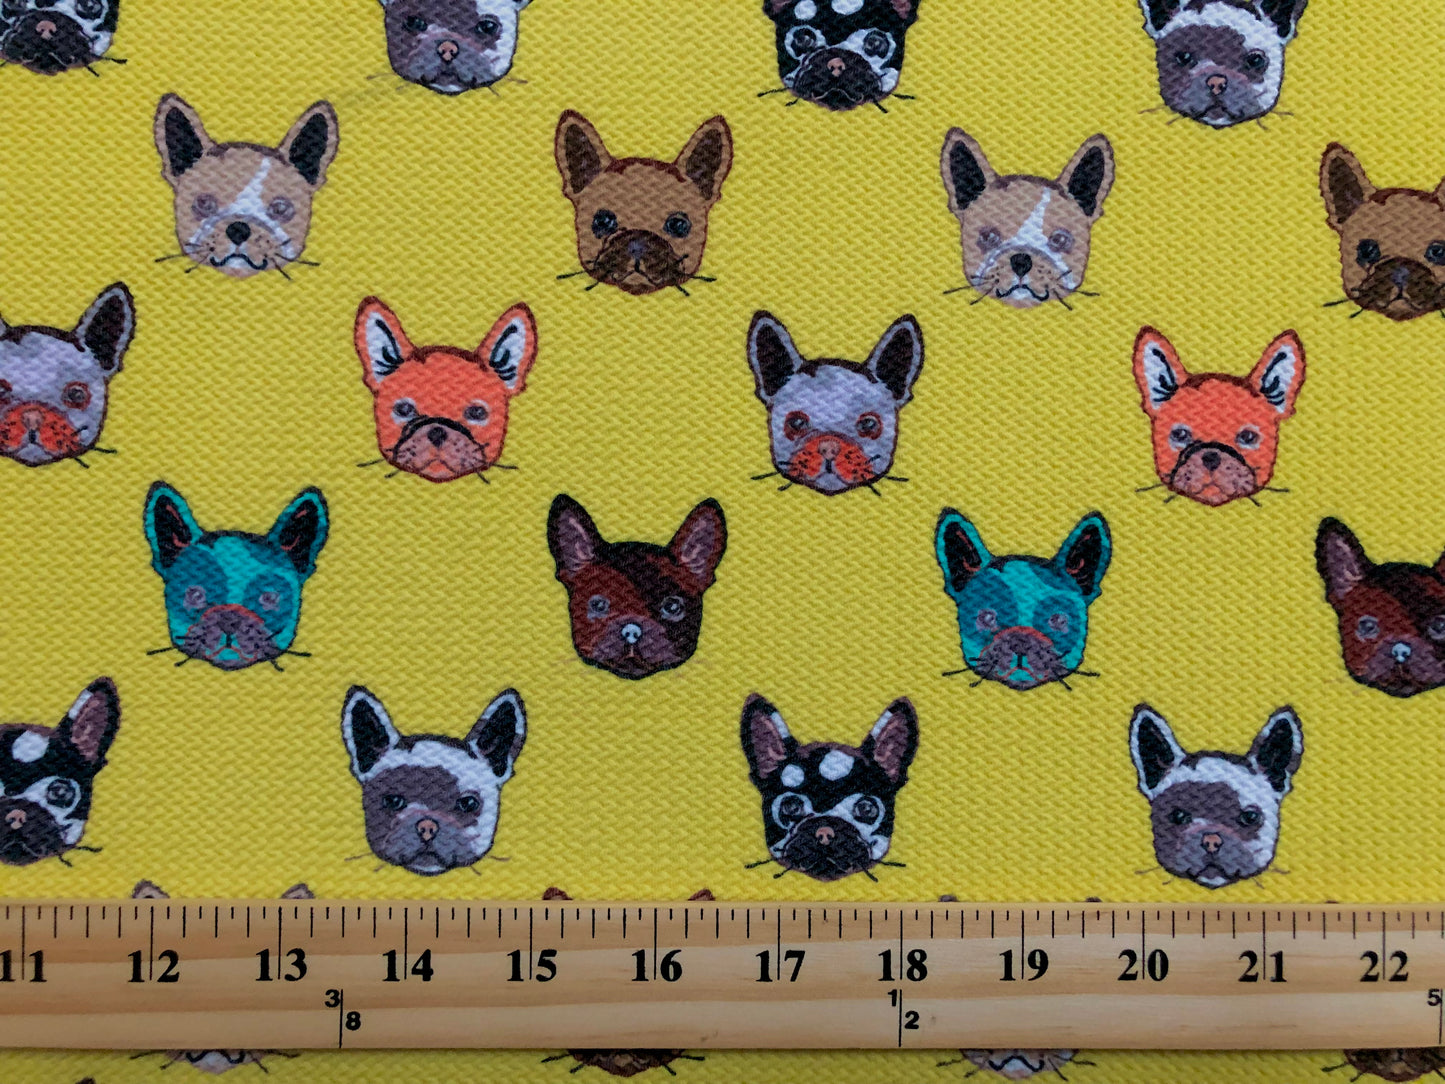 Bullet Knit Printed Fabric-Yellow Brown French Bulldog Puppies-BPR253-Sold by the Yard